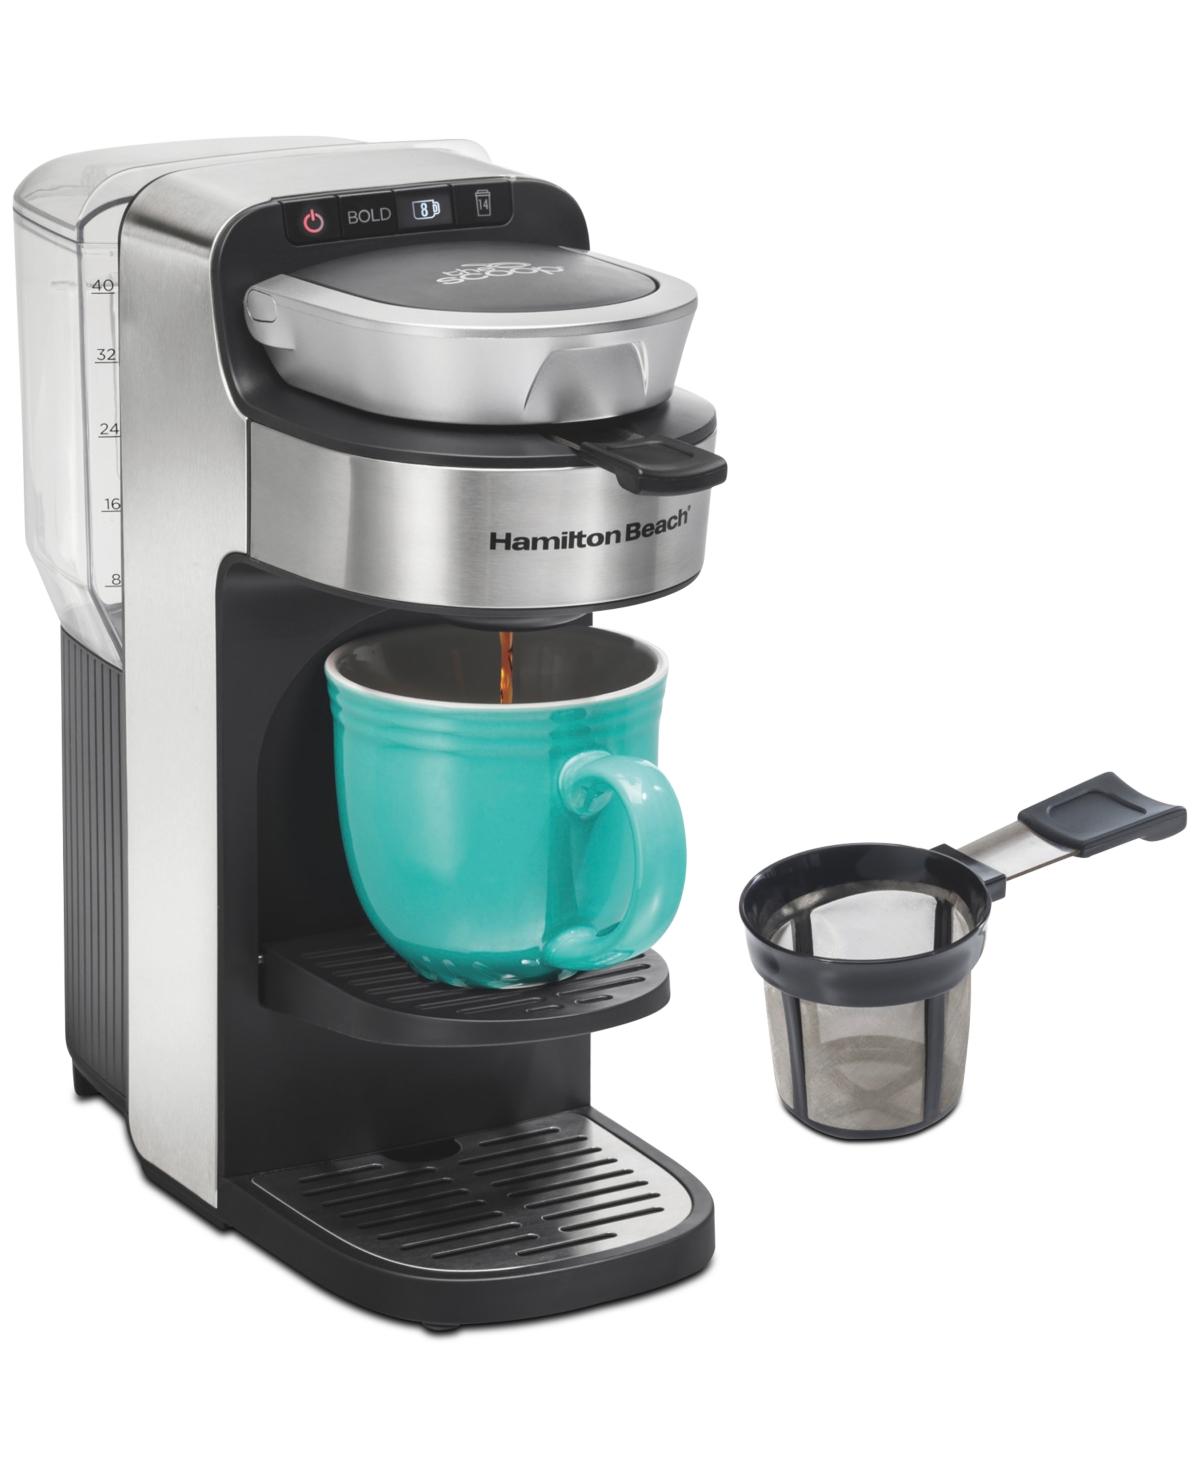 Hamilton Beach The Scoop Single-serve Coffee Maker With Removable Reservoir In Black